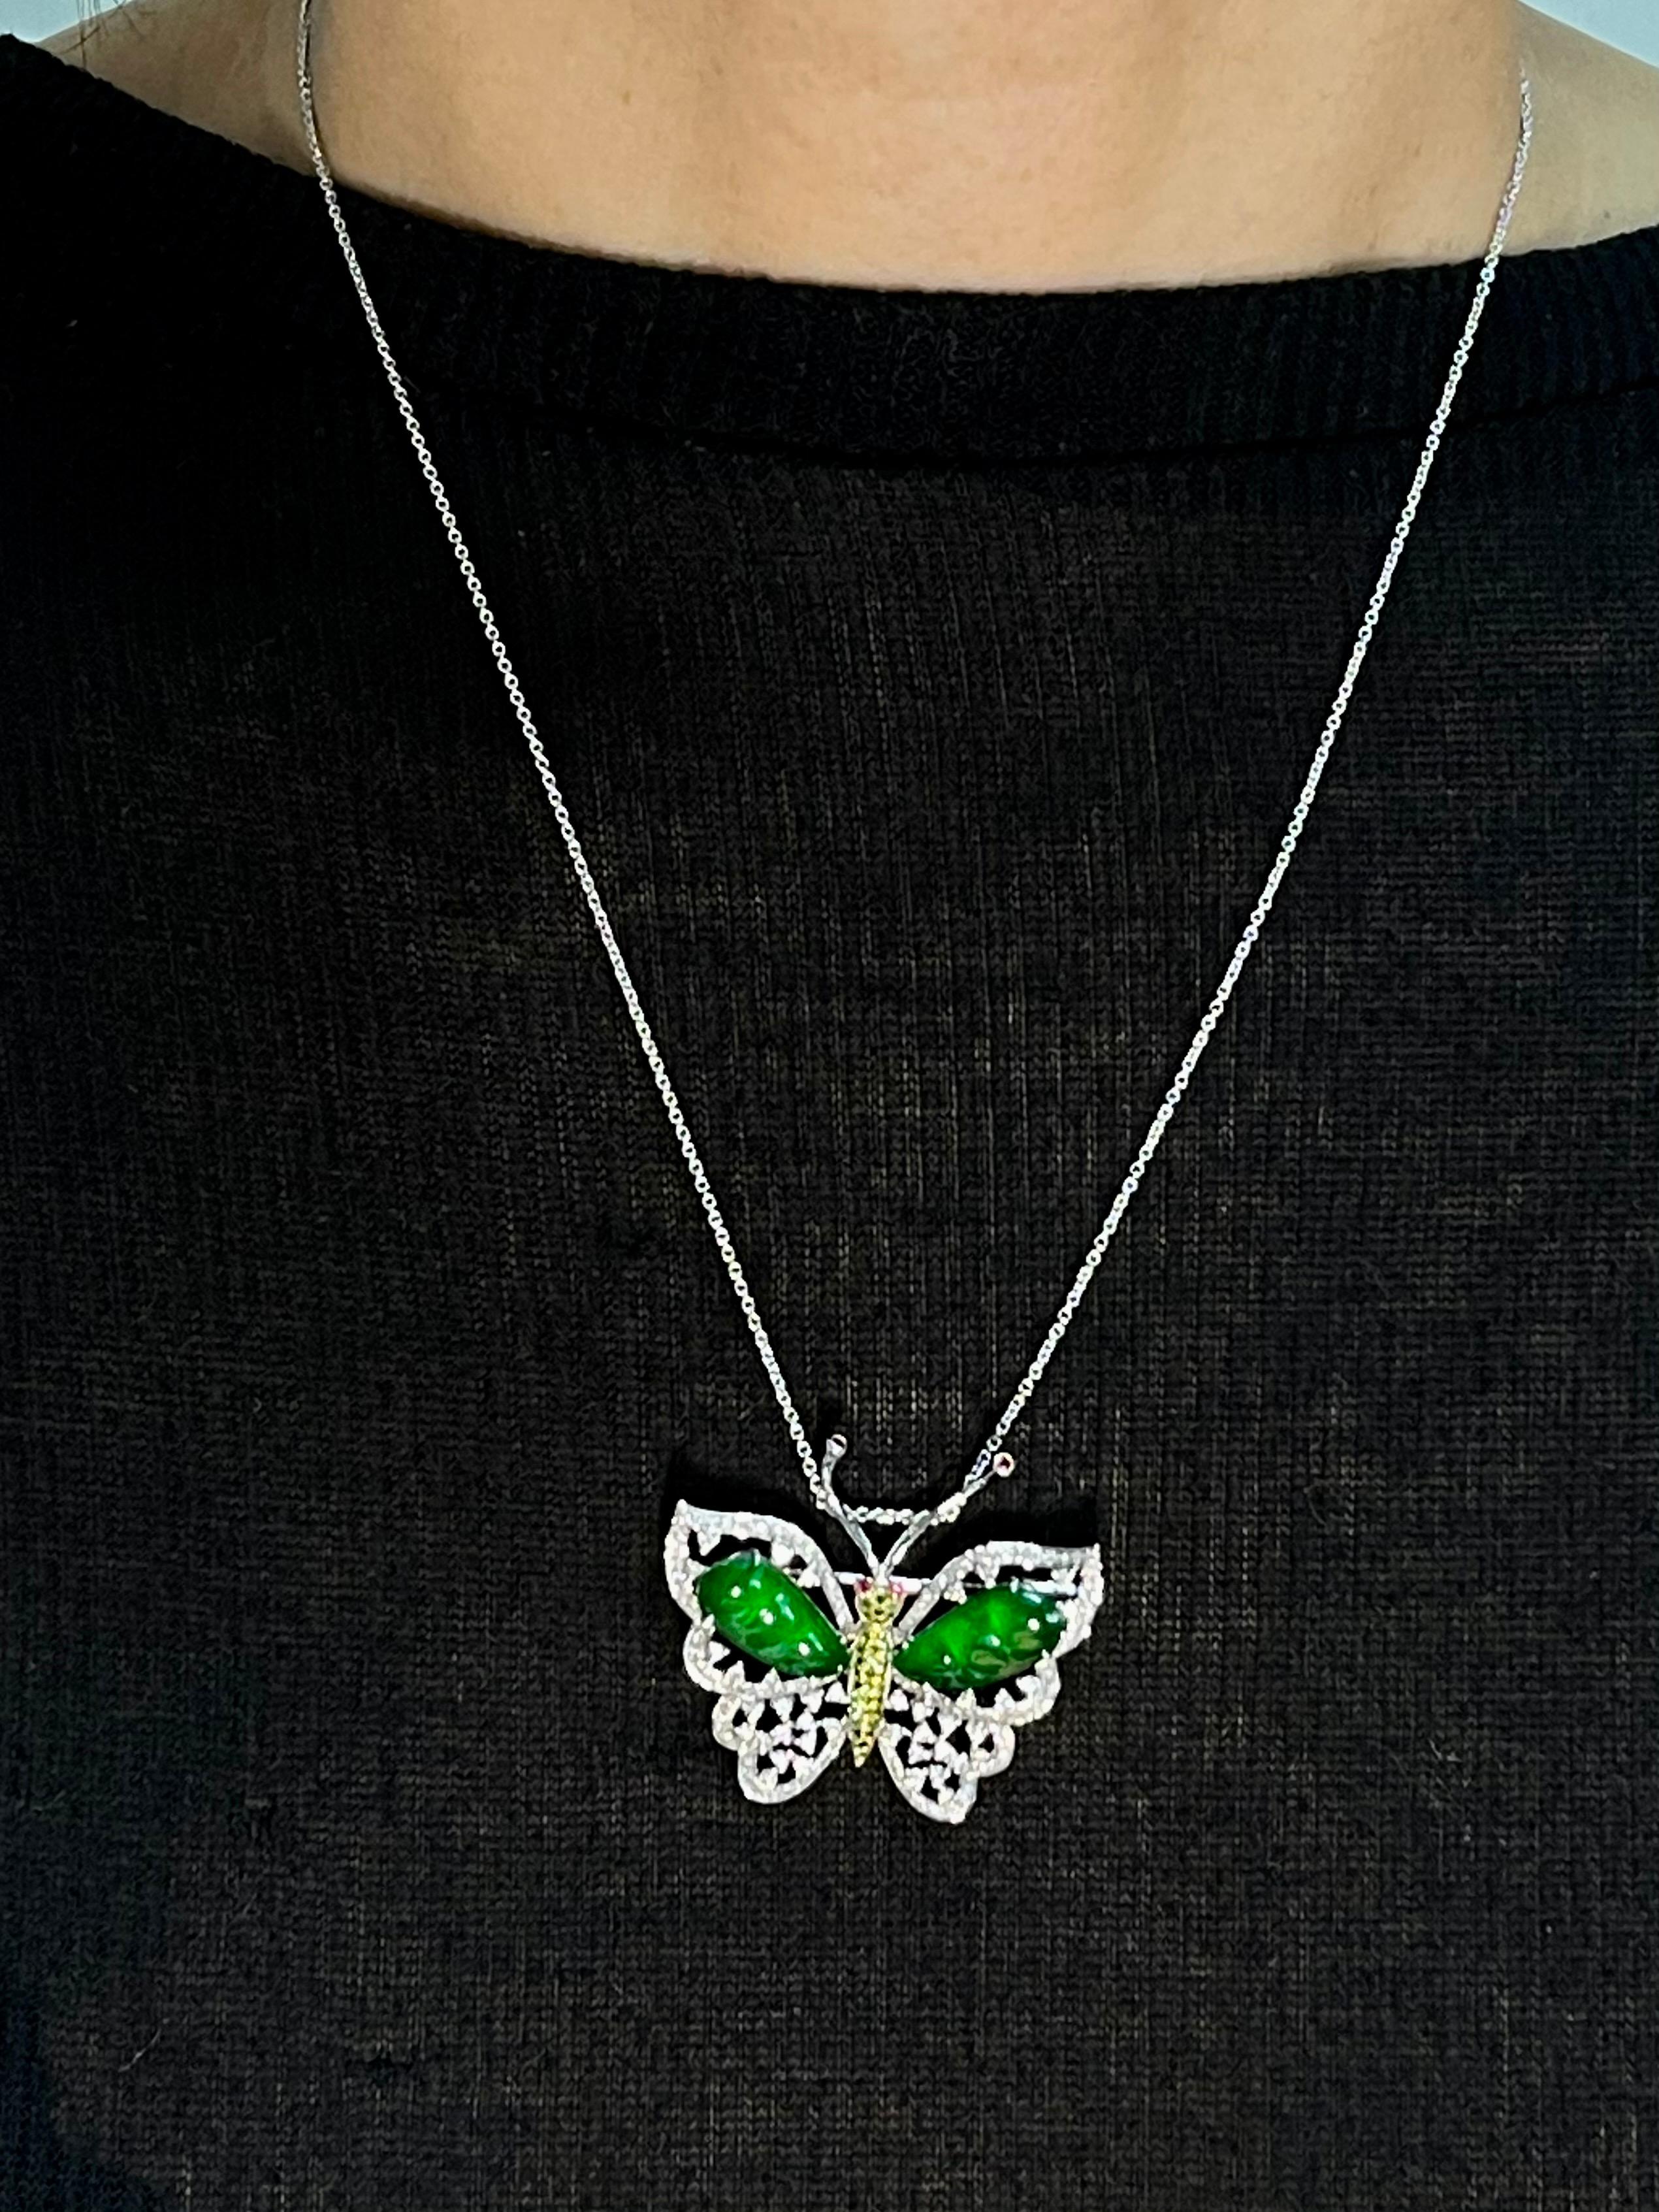 This imperial jadeite jade butterfly is out of this world! This is certified by two labs to be natural jadeite jade. The pendant / brooch is set in 18k white gold and yellow gold. There are 2 carved imperial green jade wings. We estimate around